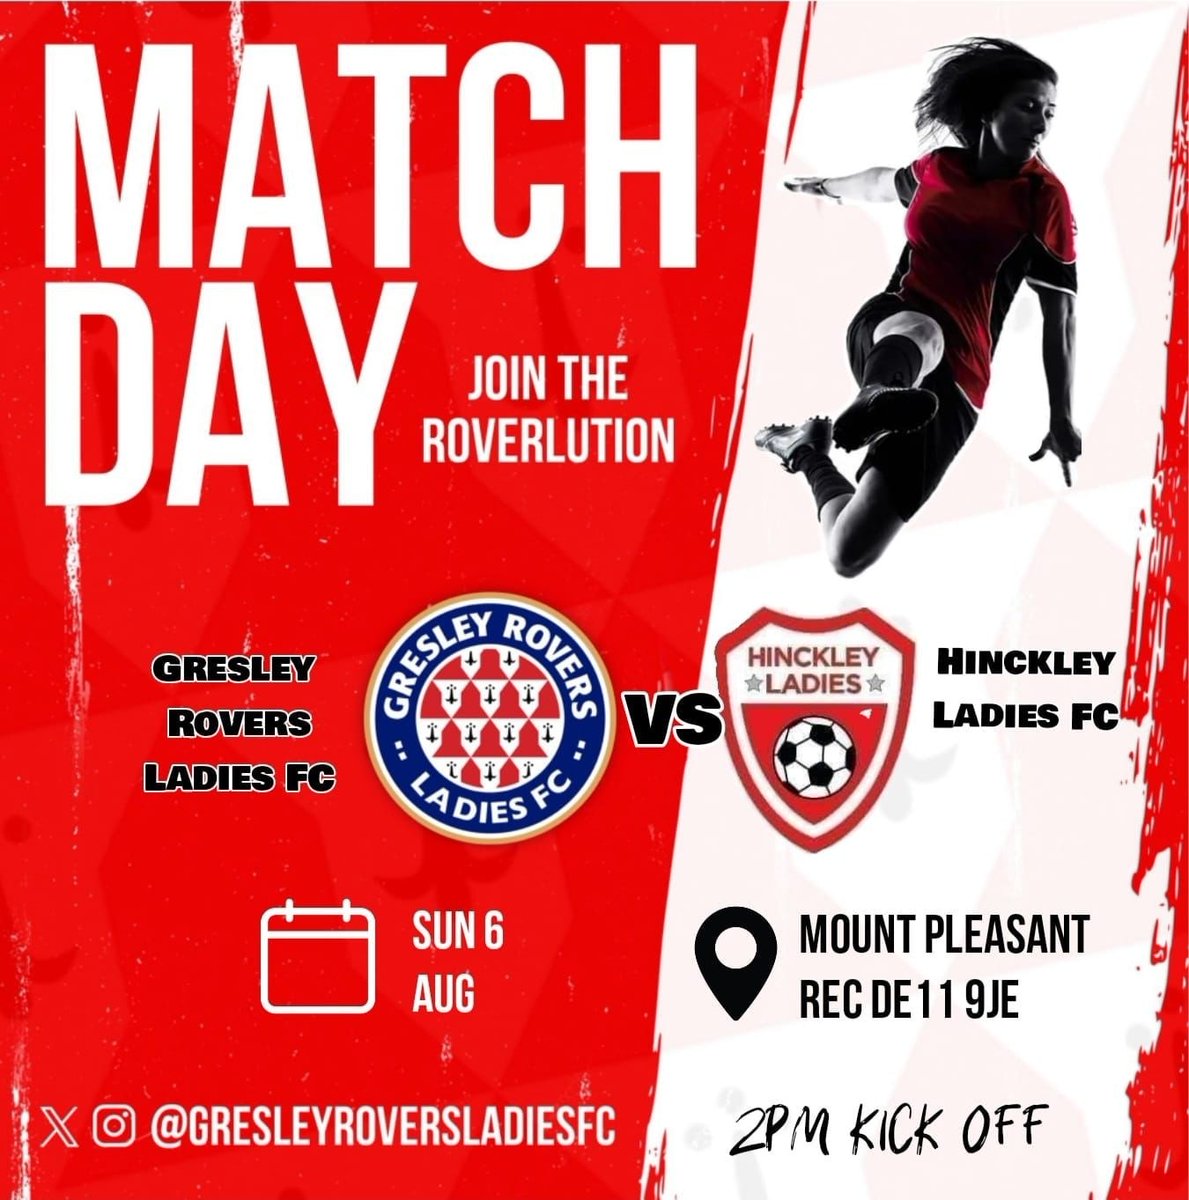 Tomorrow is our 2nd game of pre season, come and join the Roverlution and support your local ladies. 🔴⚪